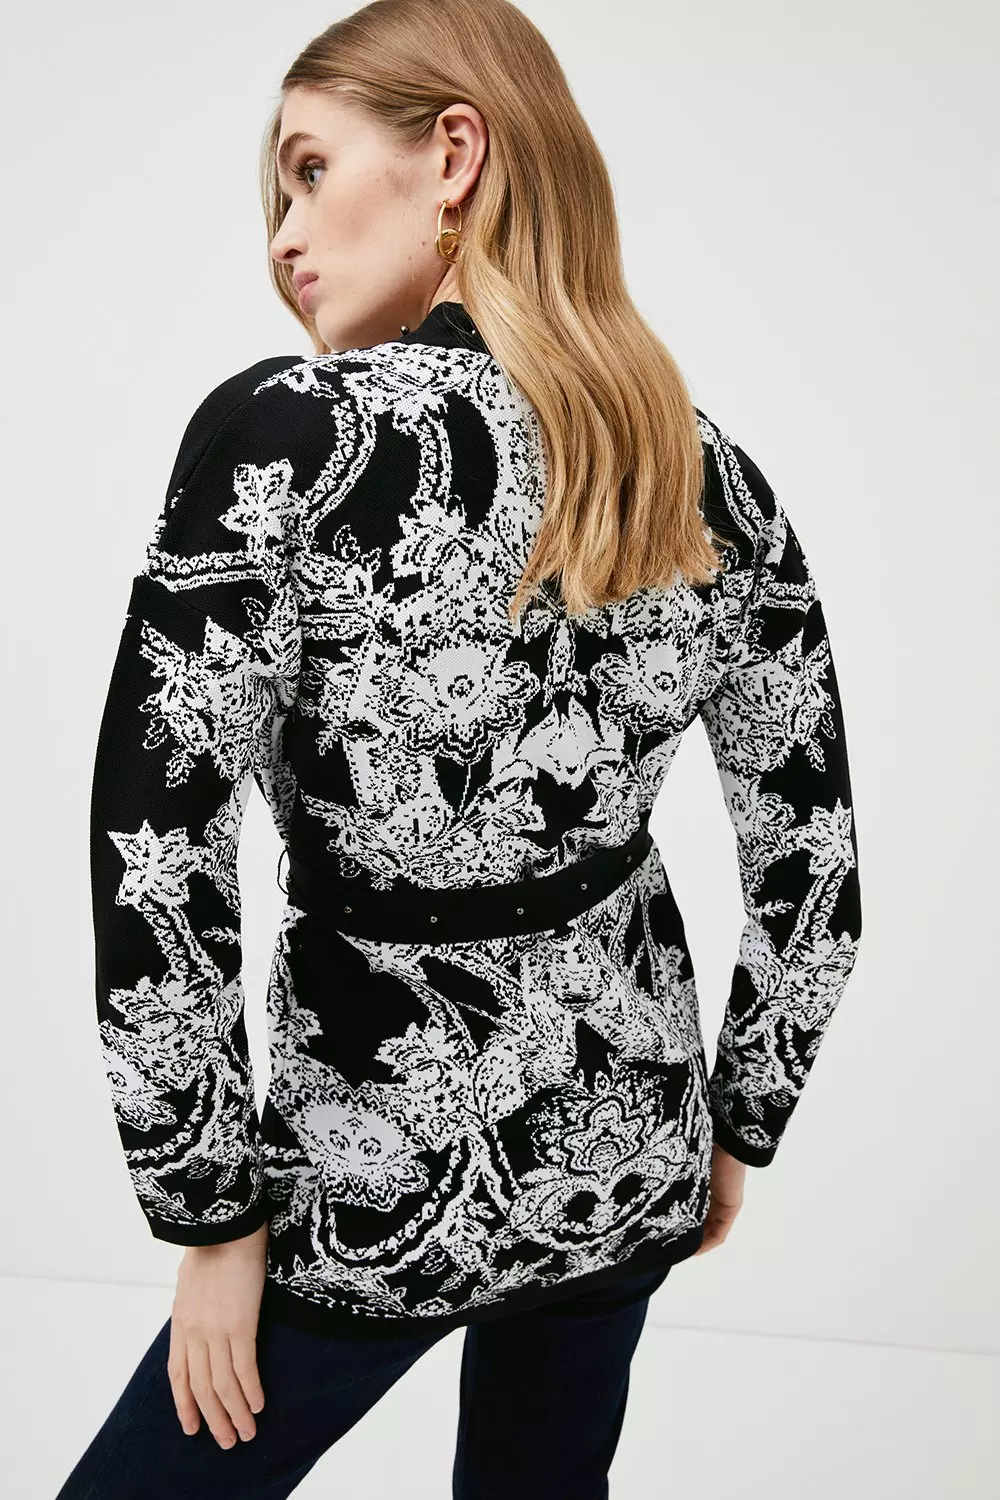 Mirror Paisley Jacquard Knit Belted Cardigan